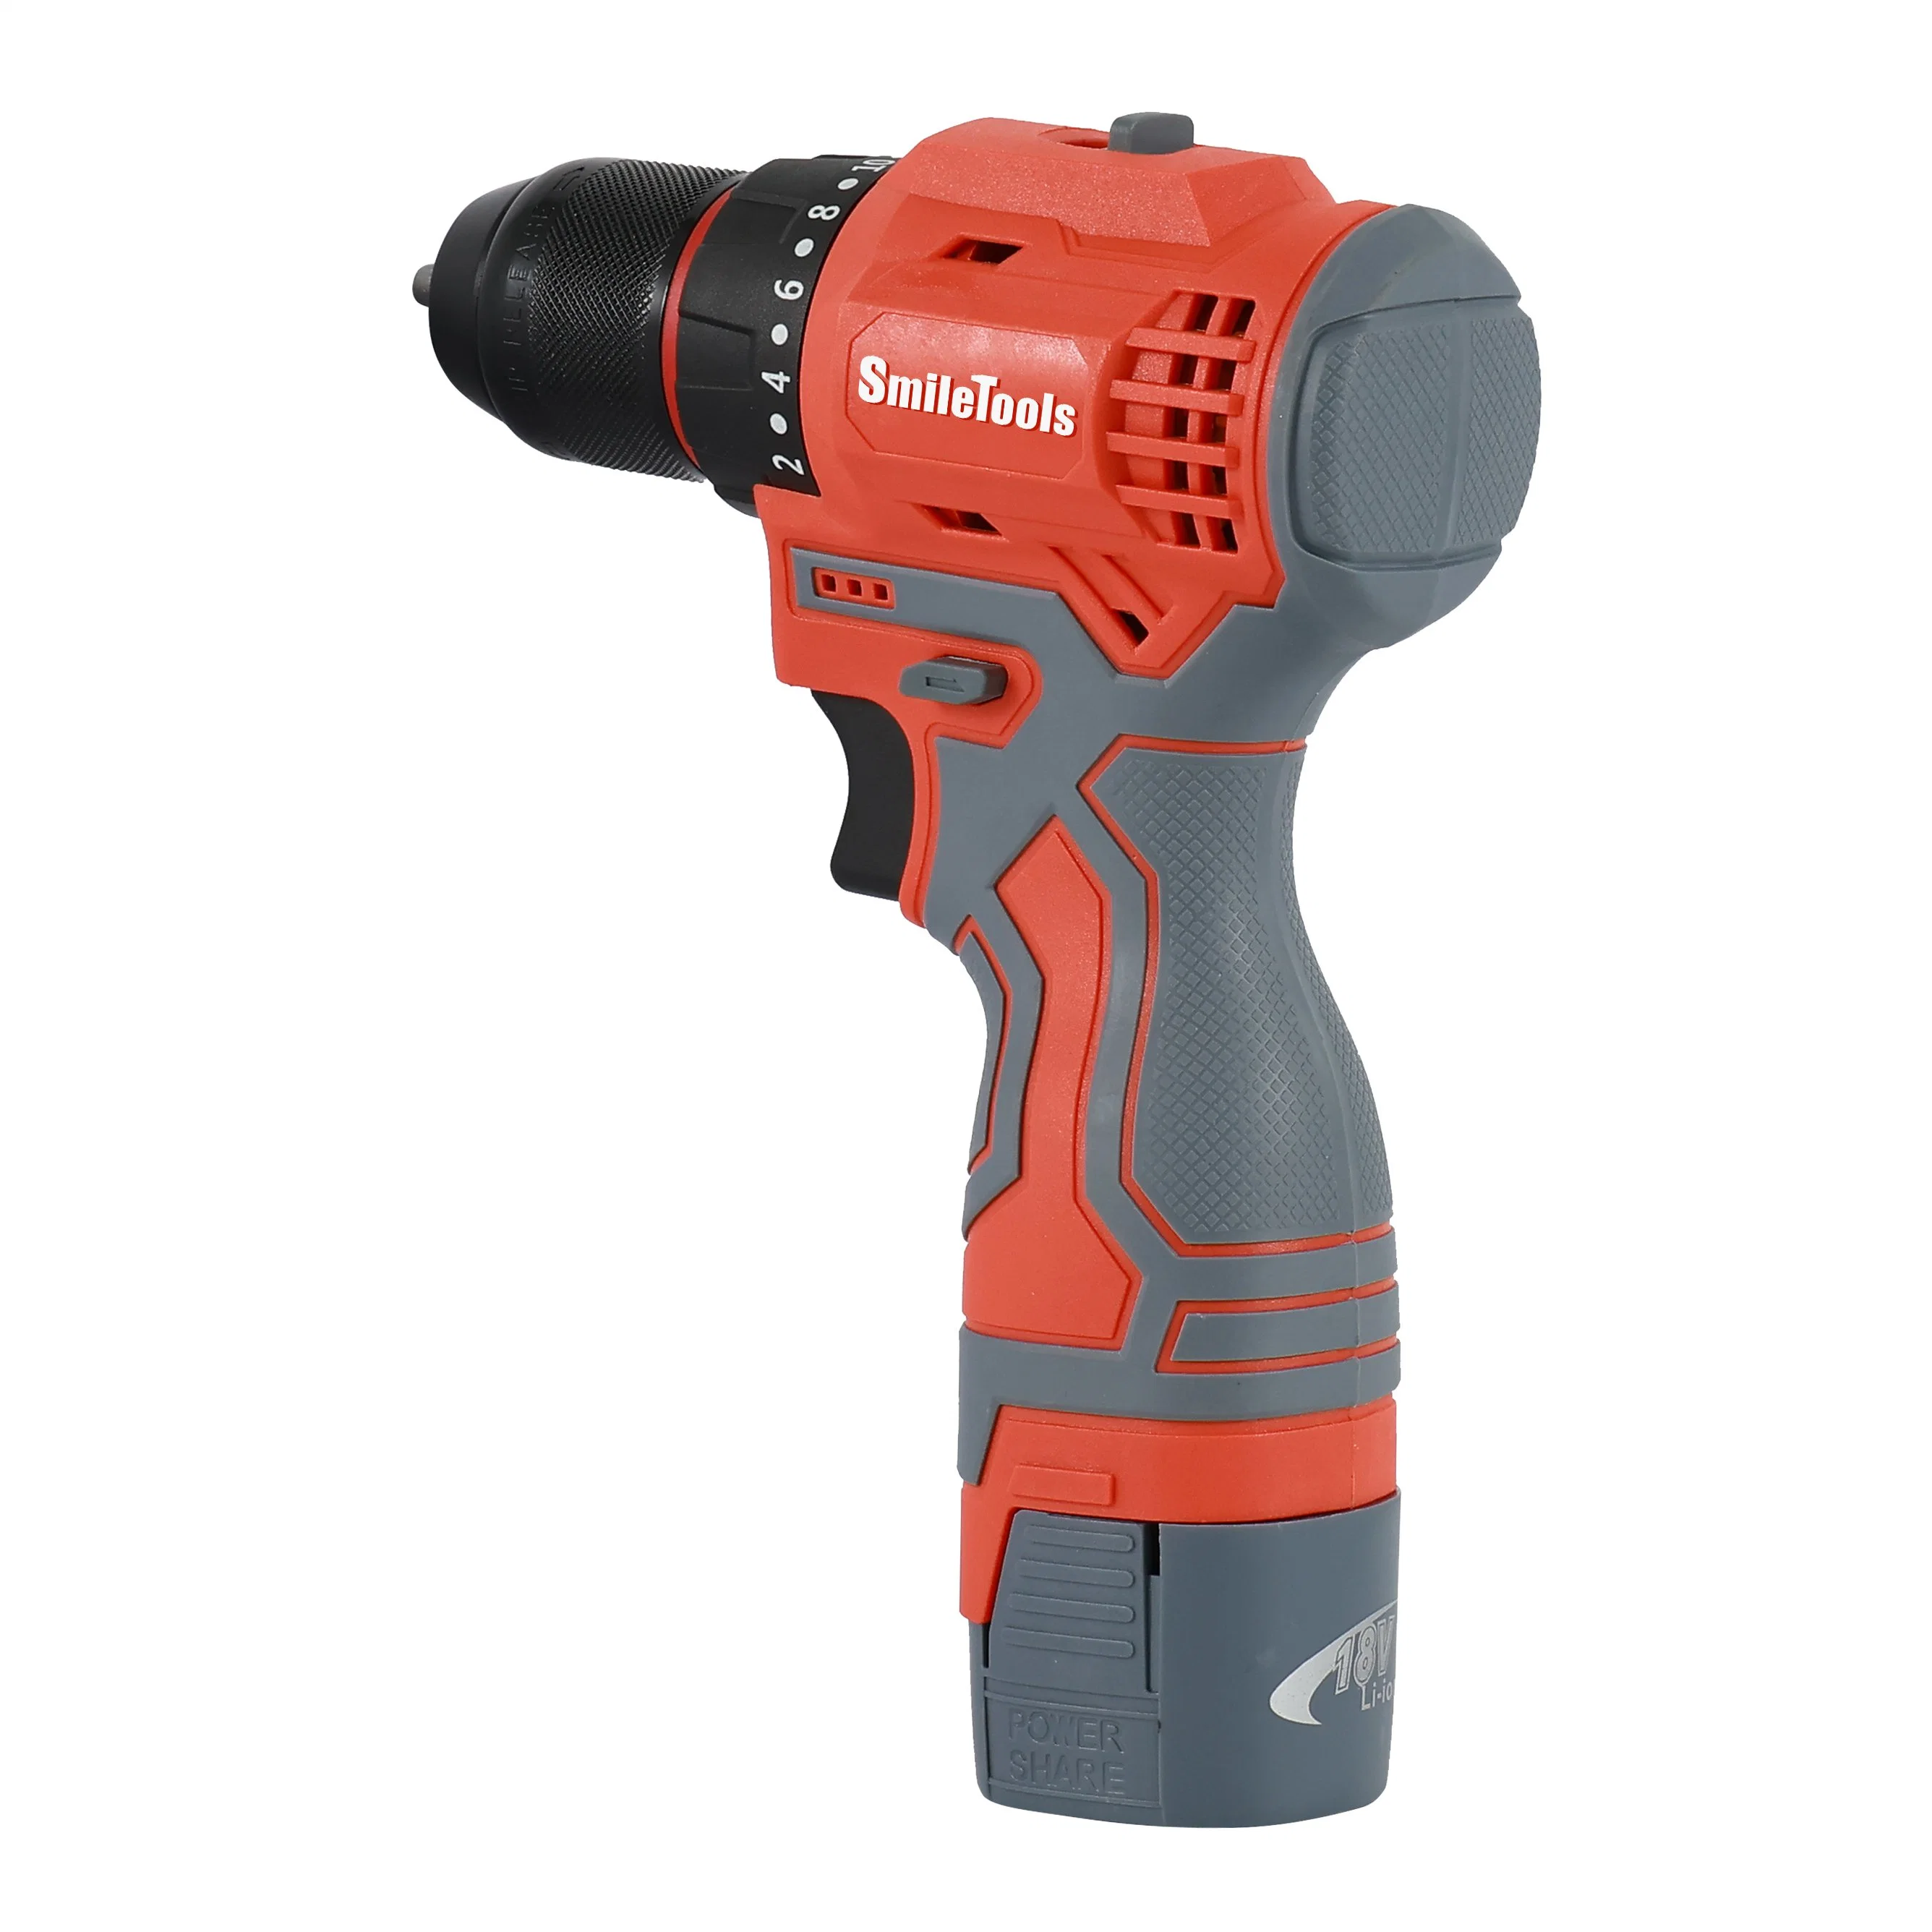 Factory Supply Power Craft Cordless Electric Power Drills Rechargeable Drilling Machines Screwdriver Cordless Drill